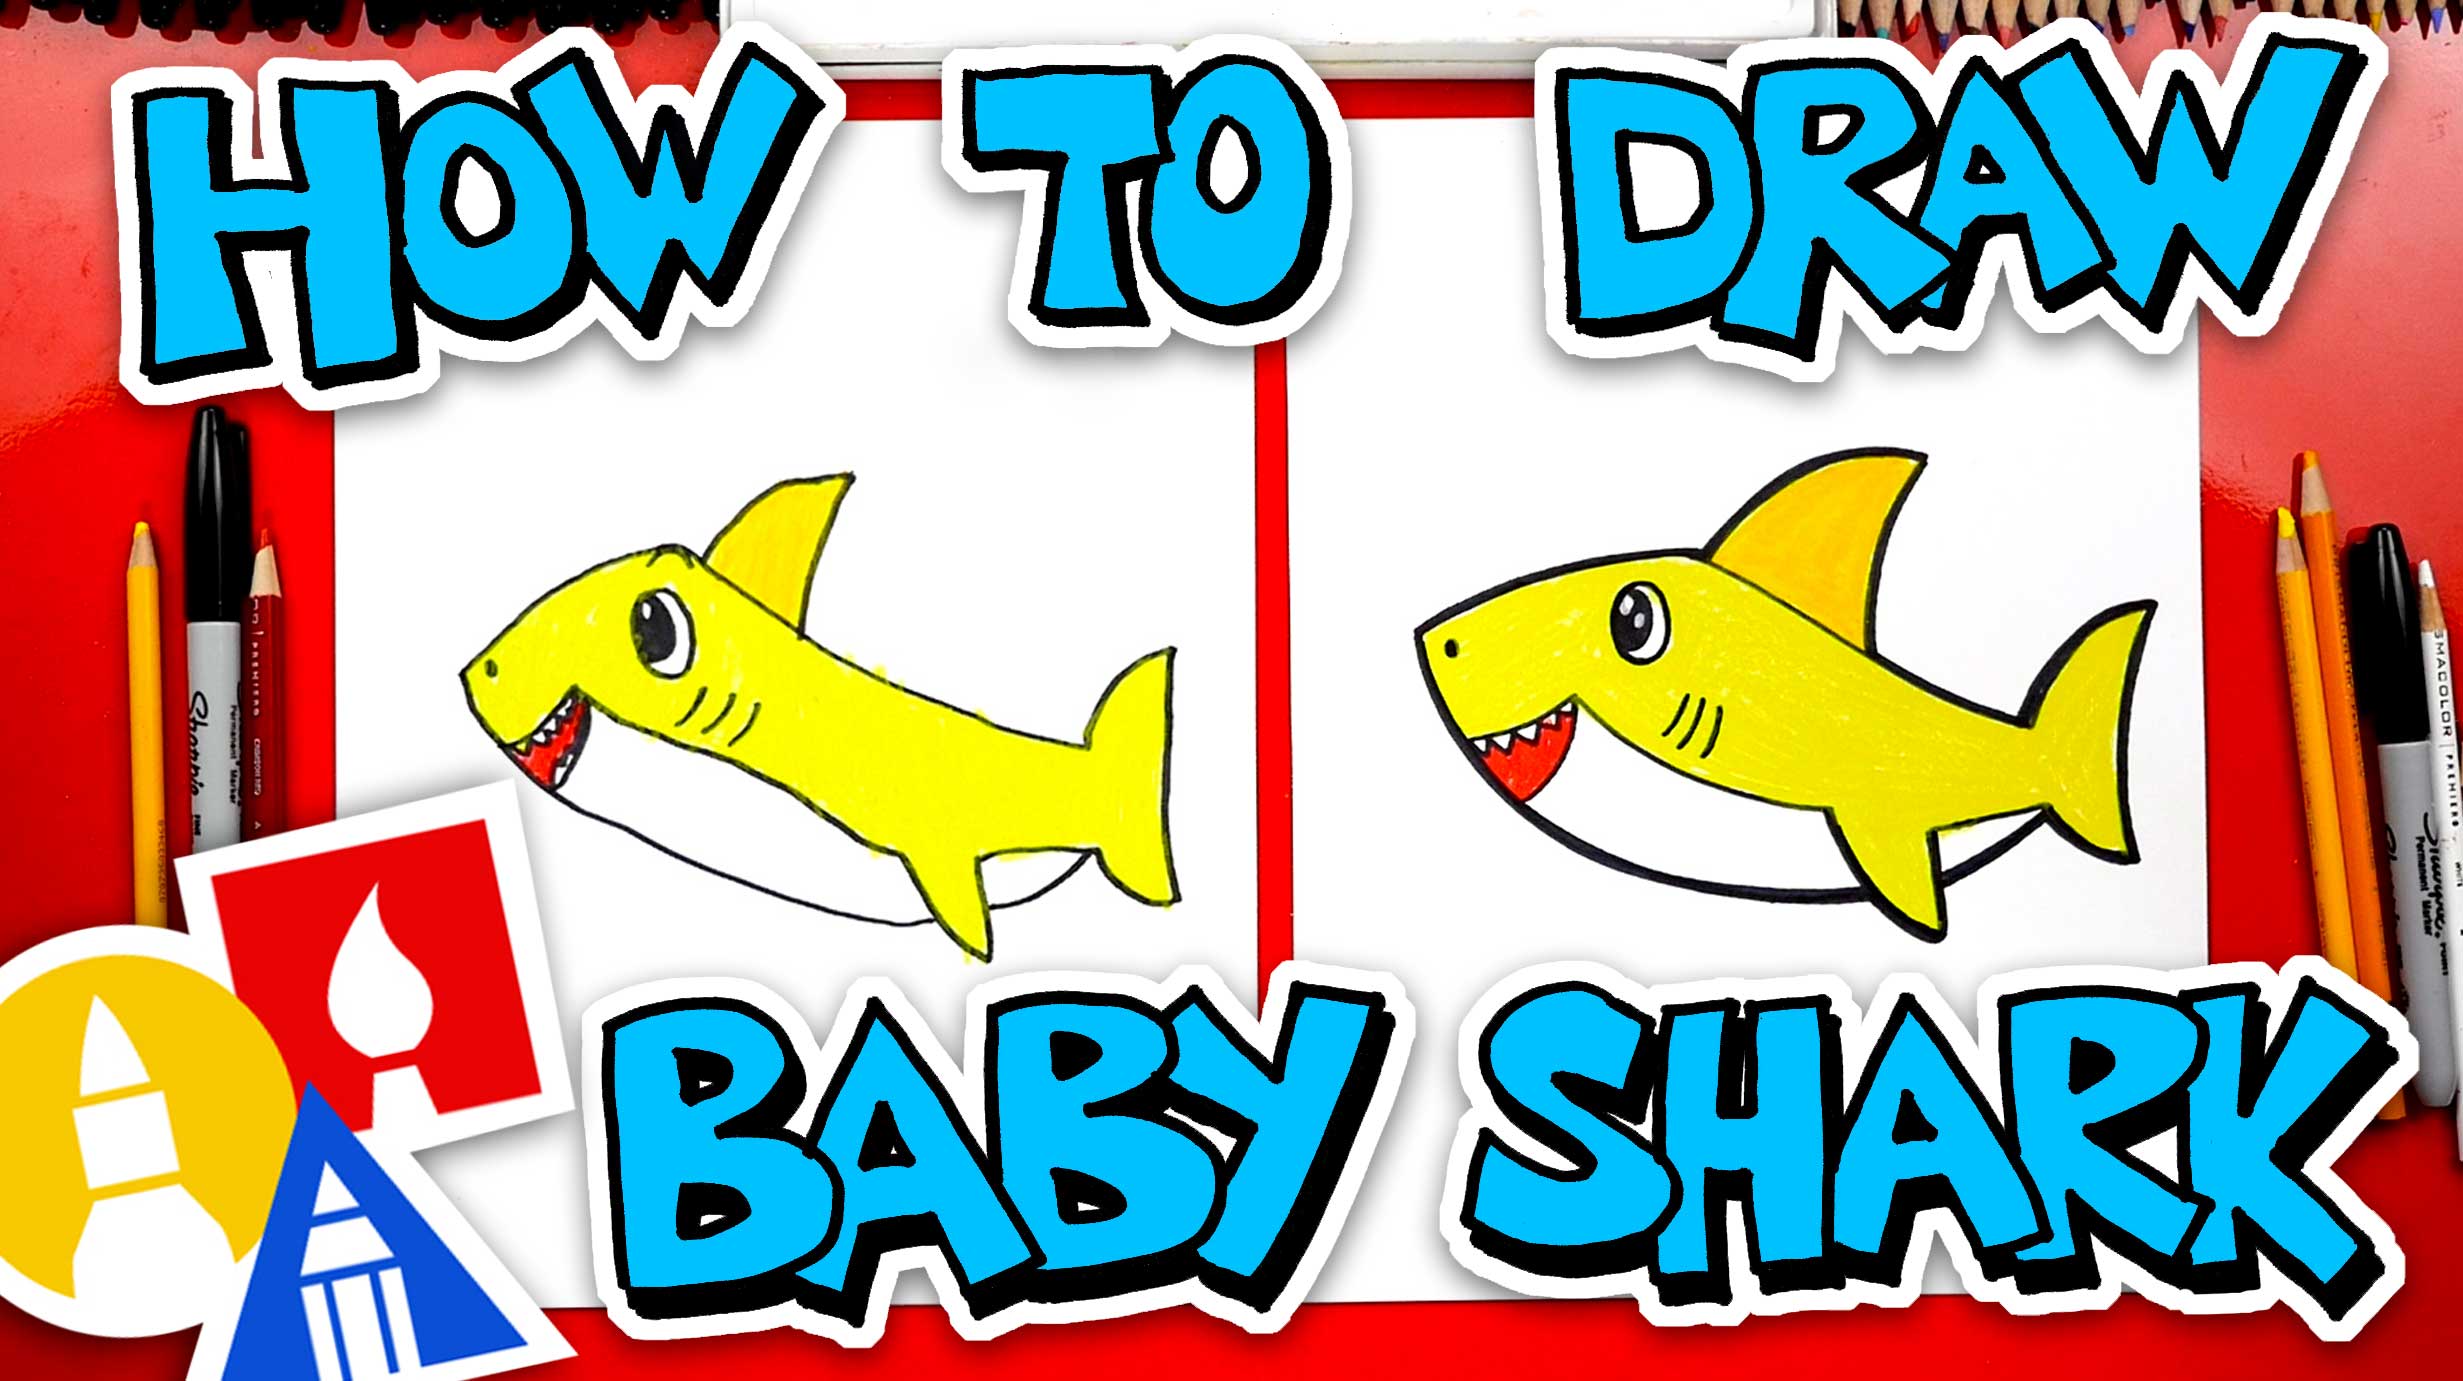 How to Draw a Cute Shark - Easy Pictures to Draw - YouTube